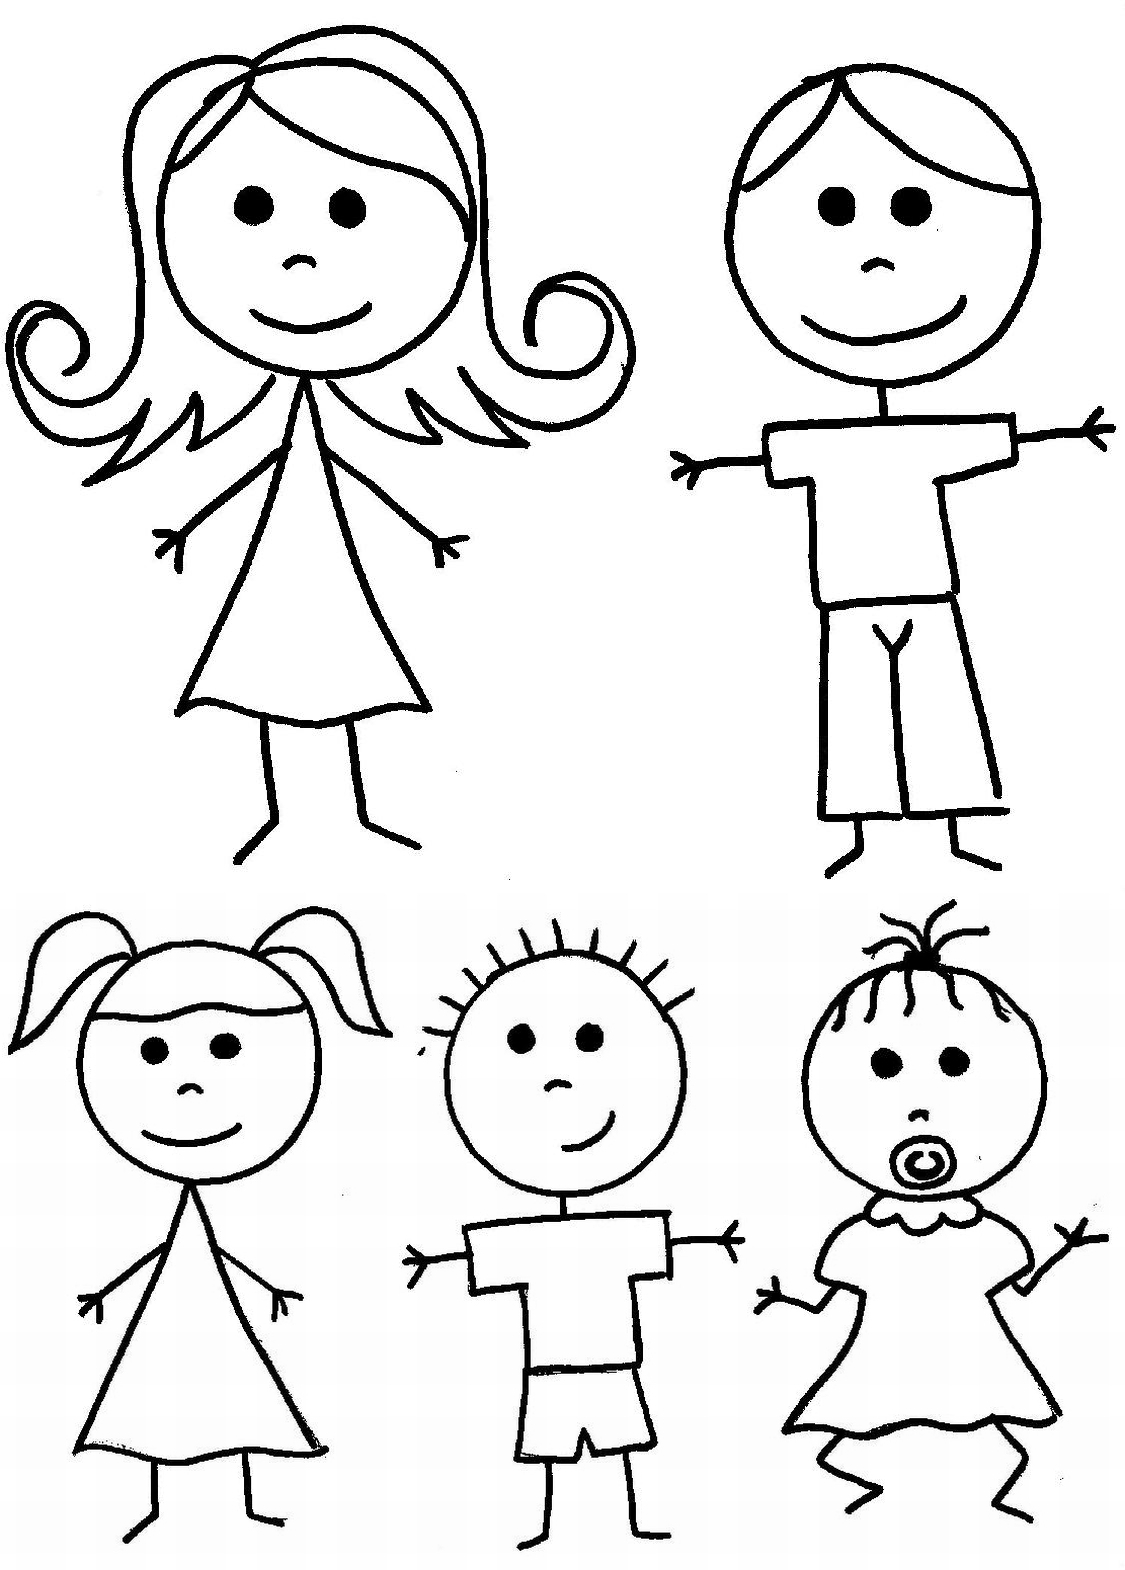 Stickman Coloring Pages at GetColorings.com | Free printable colorings